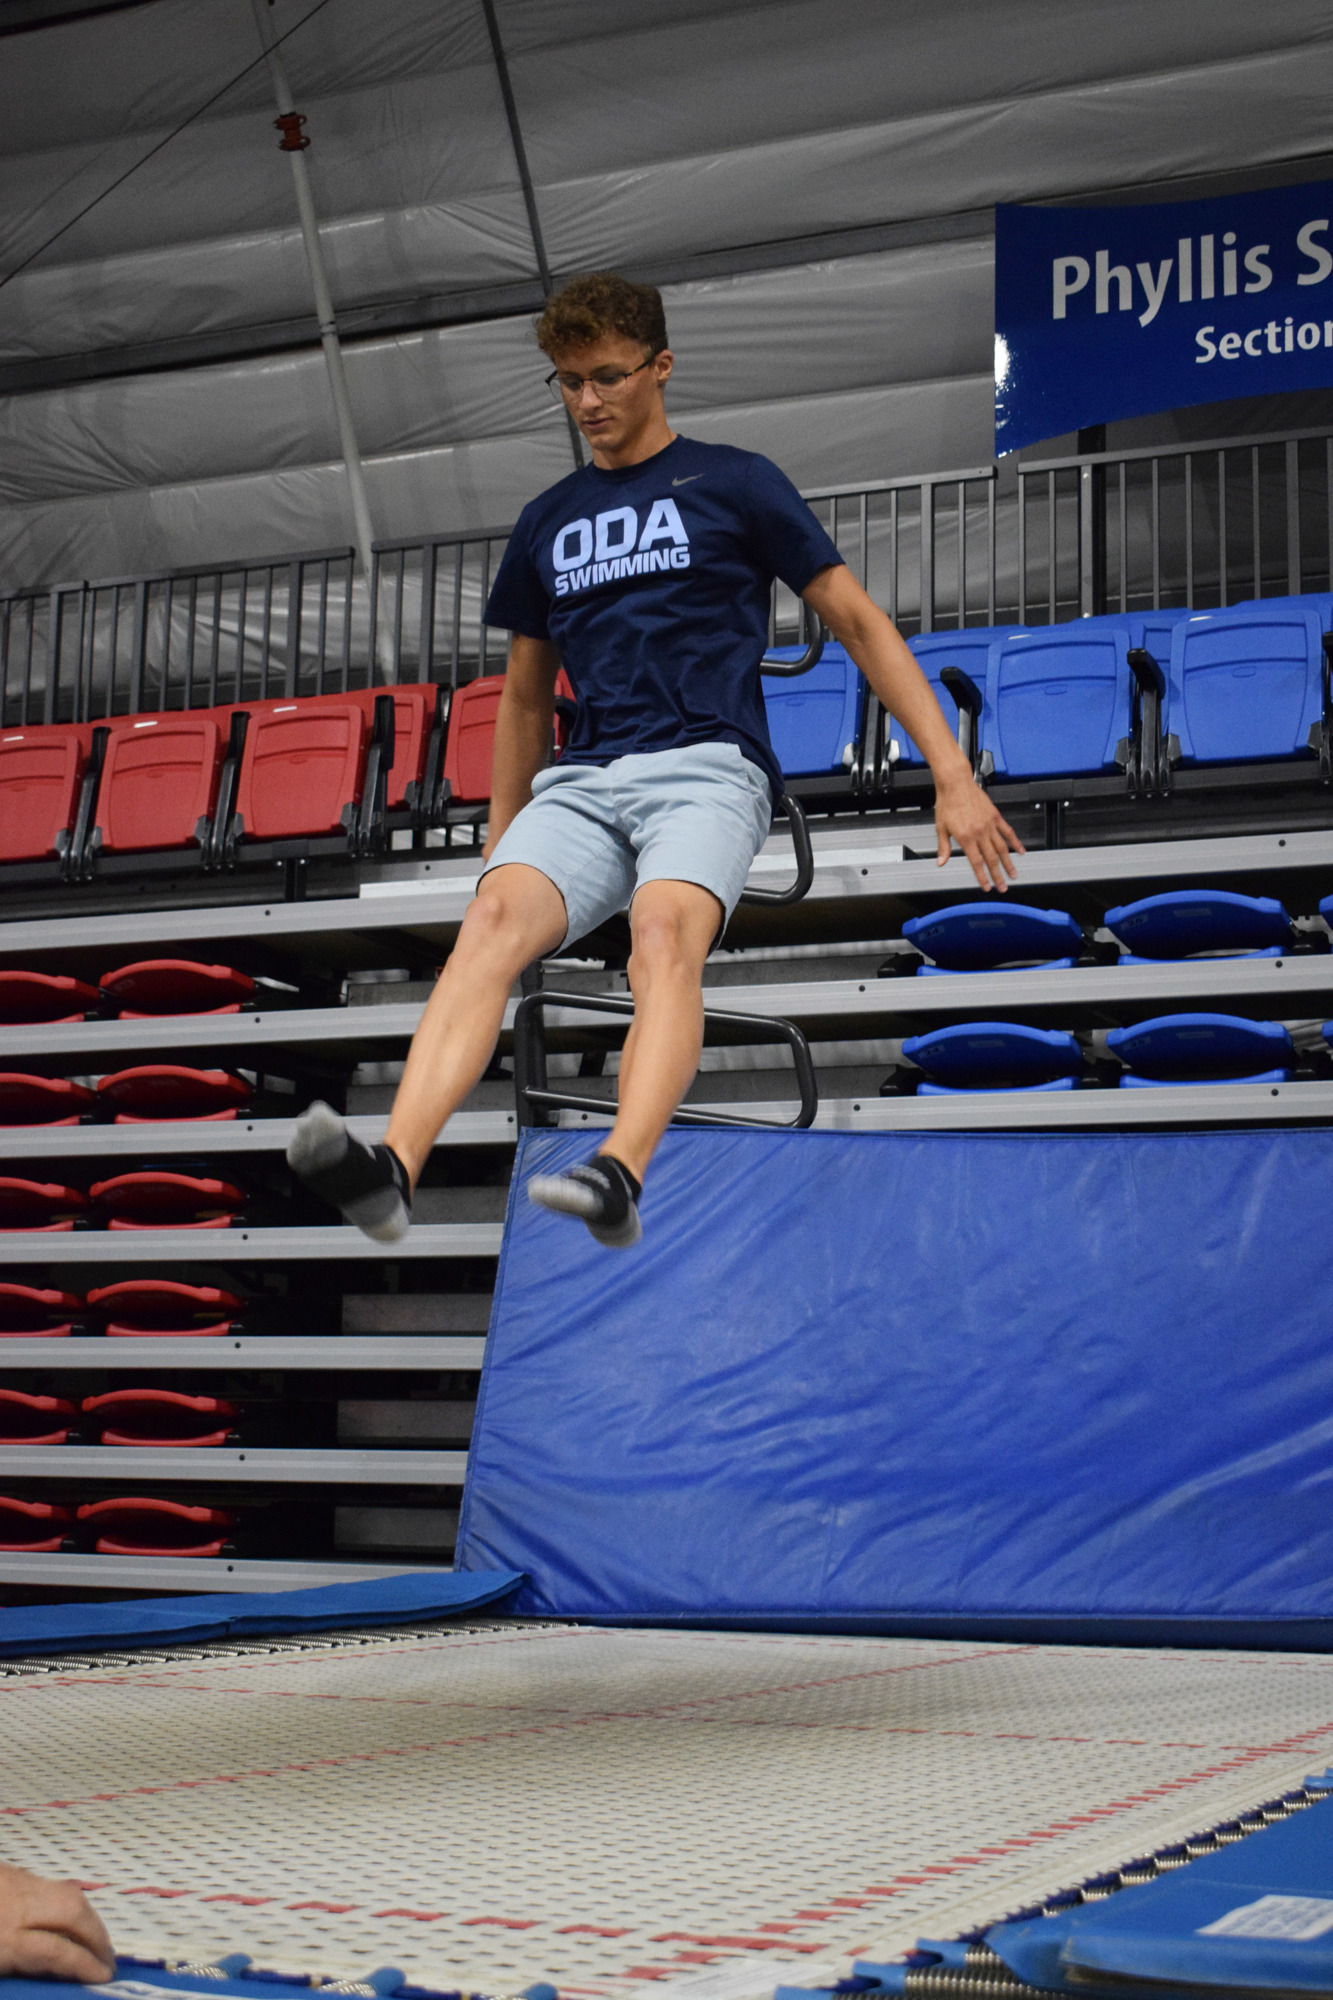 Junior Felipe Baffico practices different jumps on a trampoline.